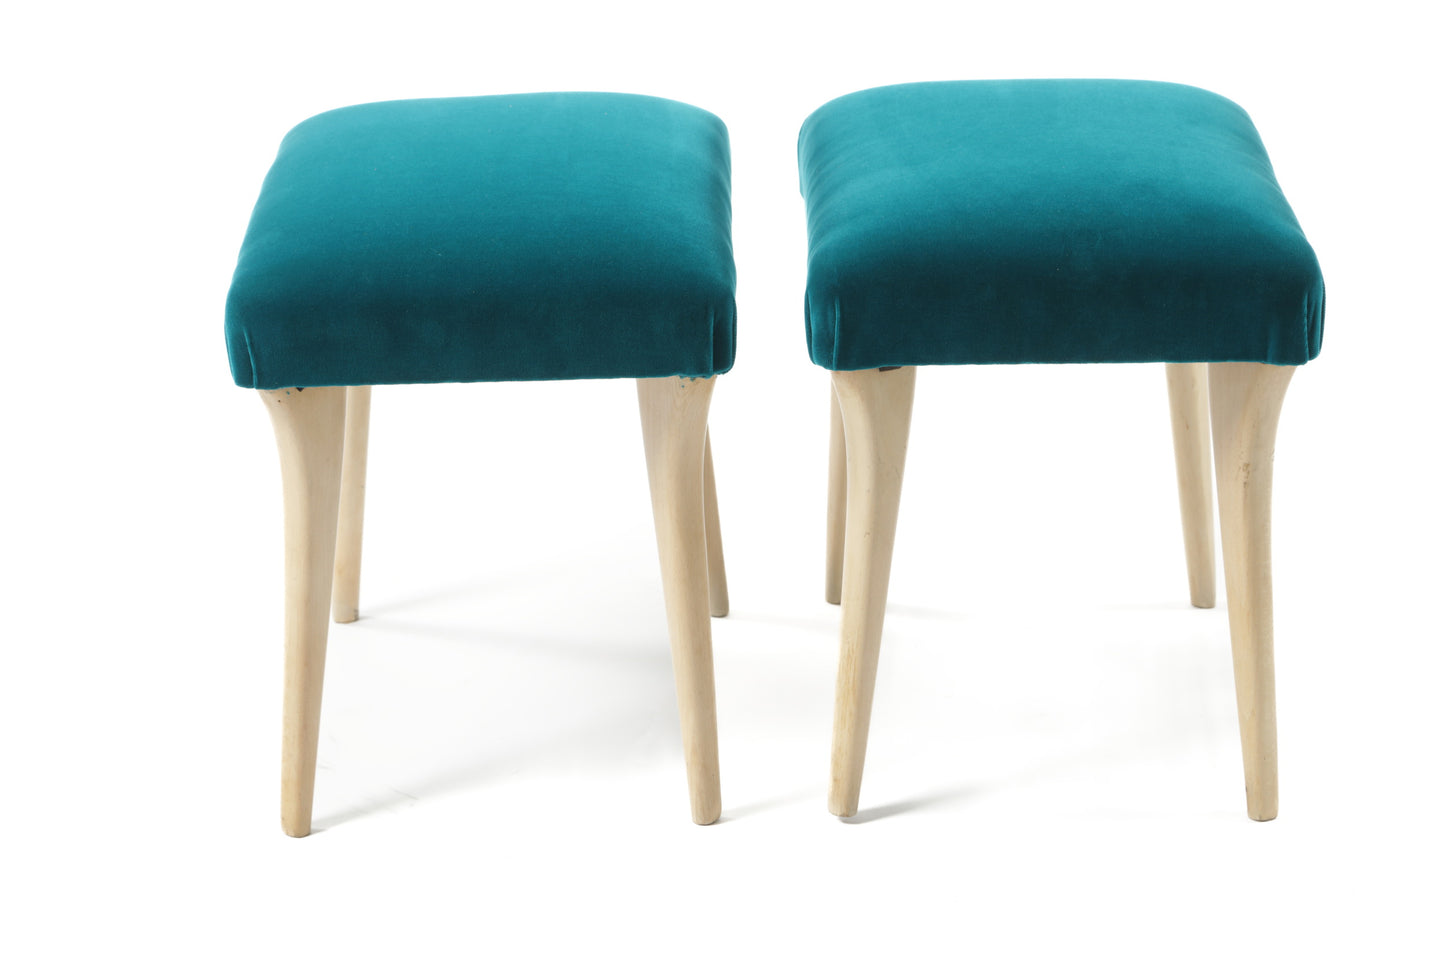 Pair of small 60s benches reinterpreted by triplef